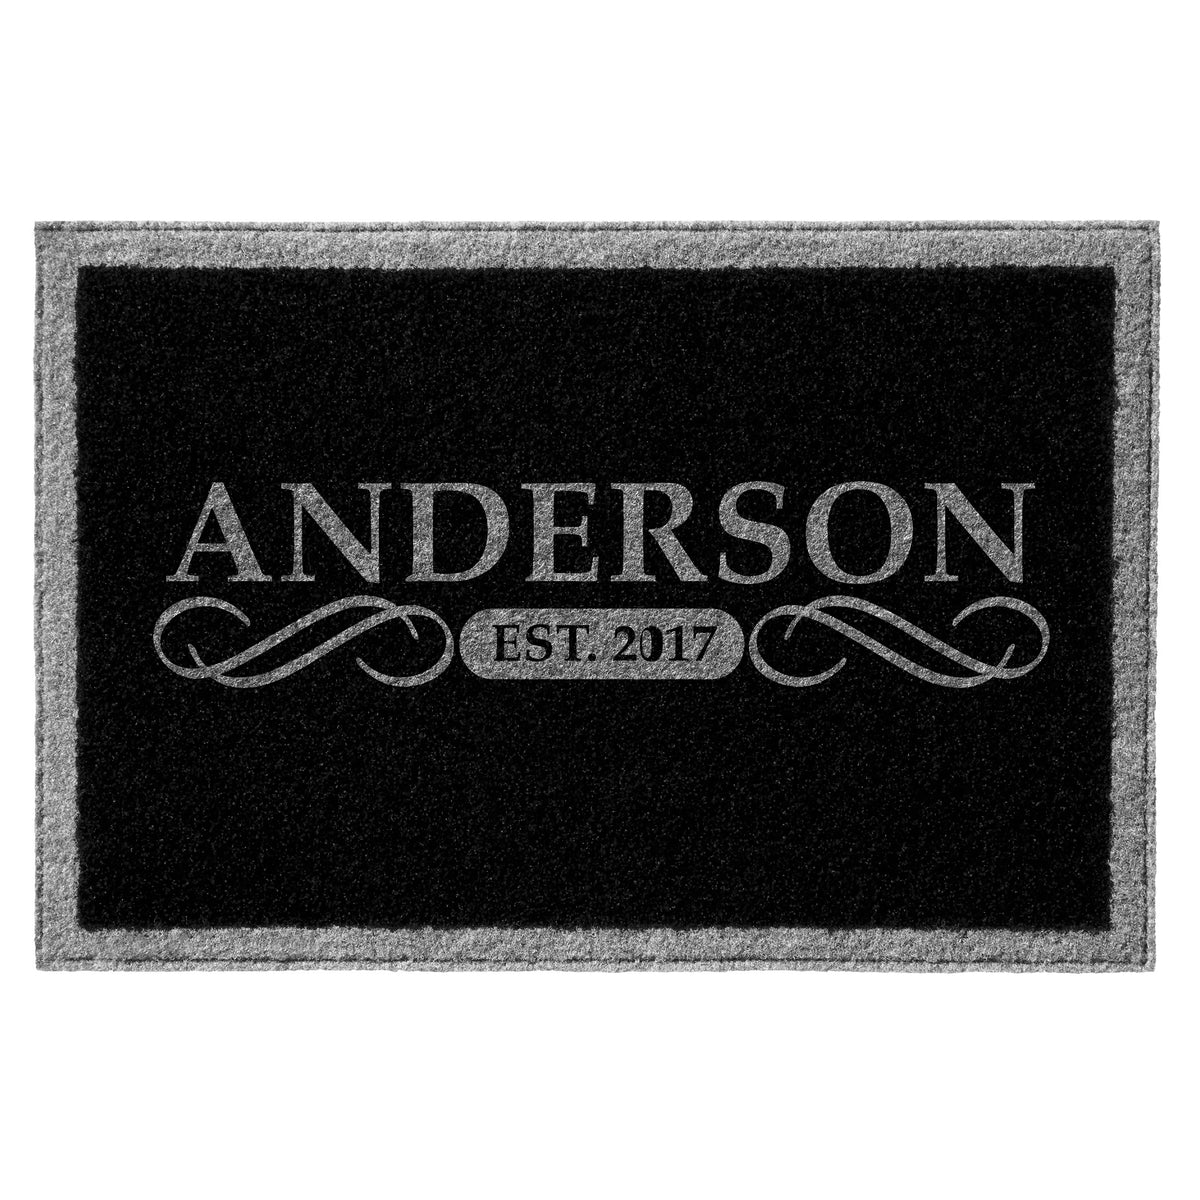 Infinity Custom Mats™ All-Weather Personalized Door Mat - STYLE: ANDERSON COLOR: BLACK / GREY - rugsthatfit.com